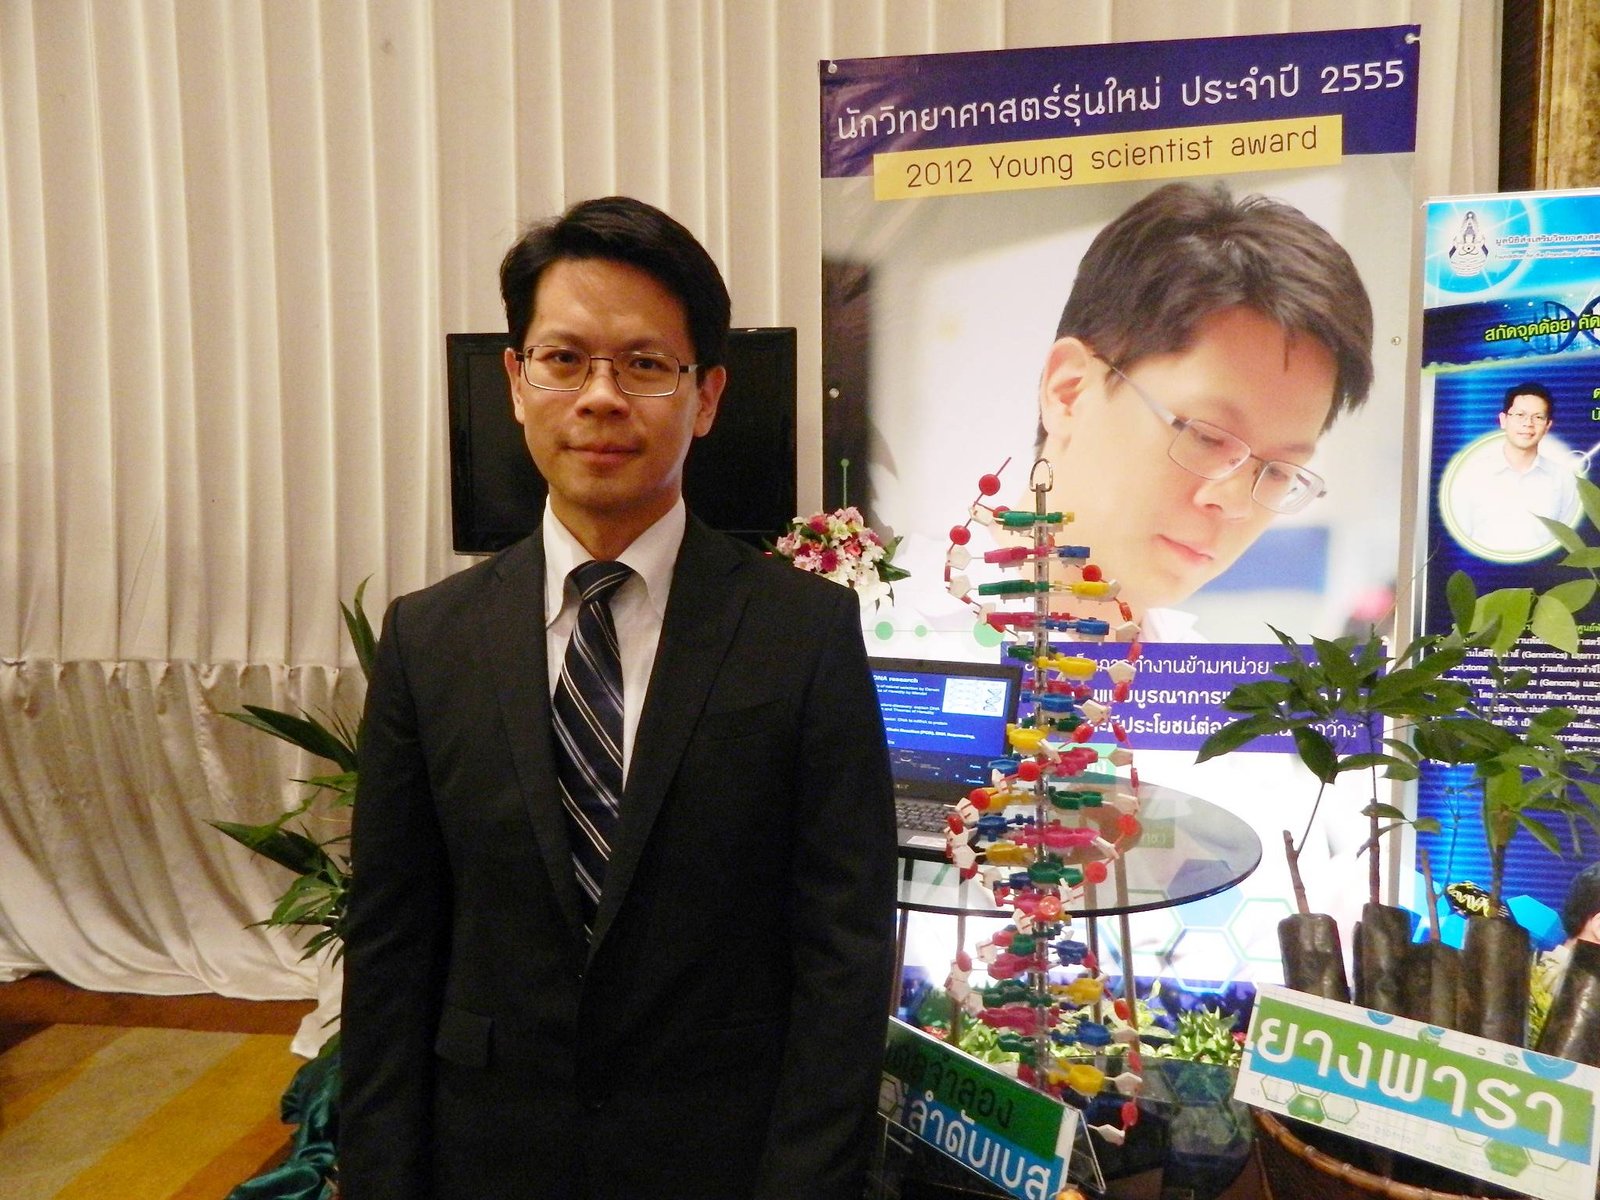 Dr Sithichoke Tangphatsornruang, head, genomic research laboratory, BIOTEC - Winner of the 2012 Young Scientist Award